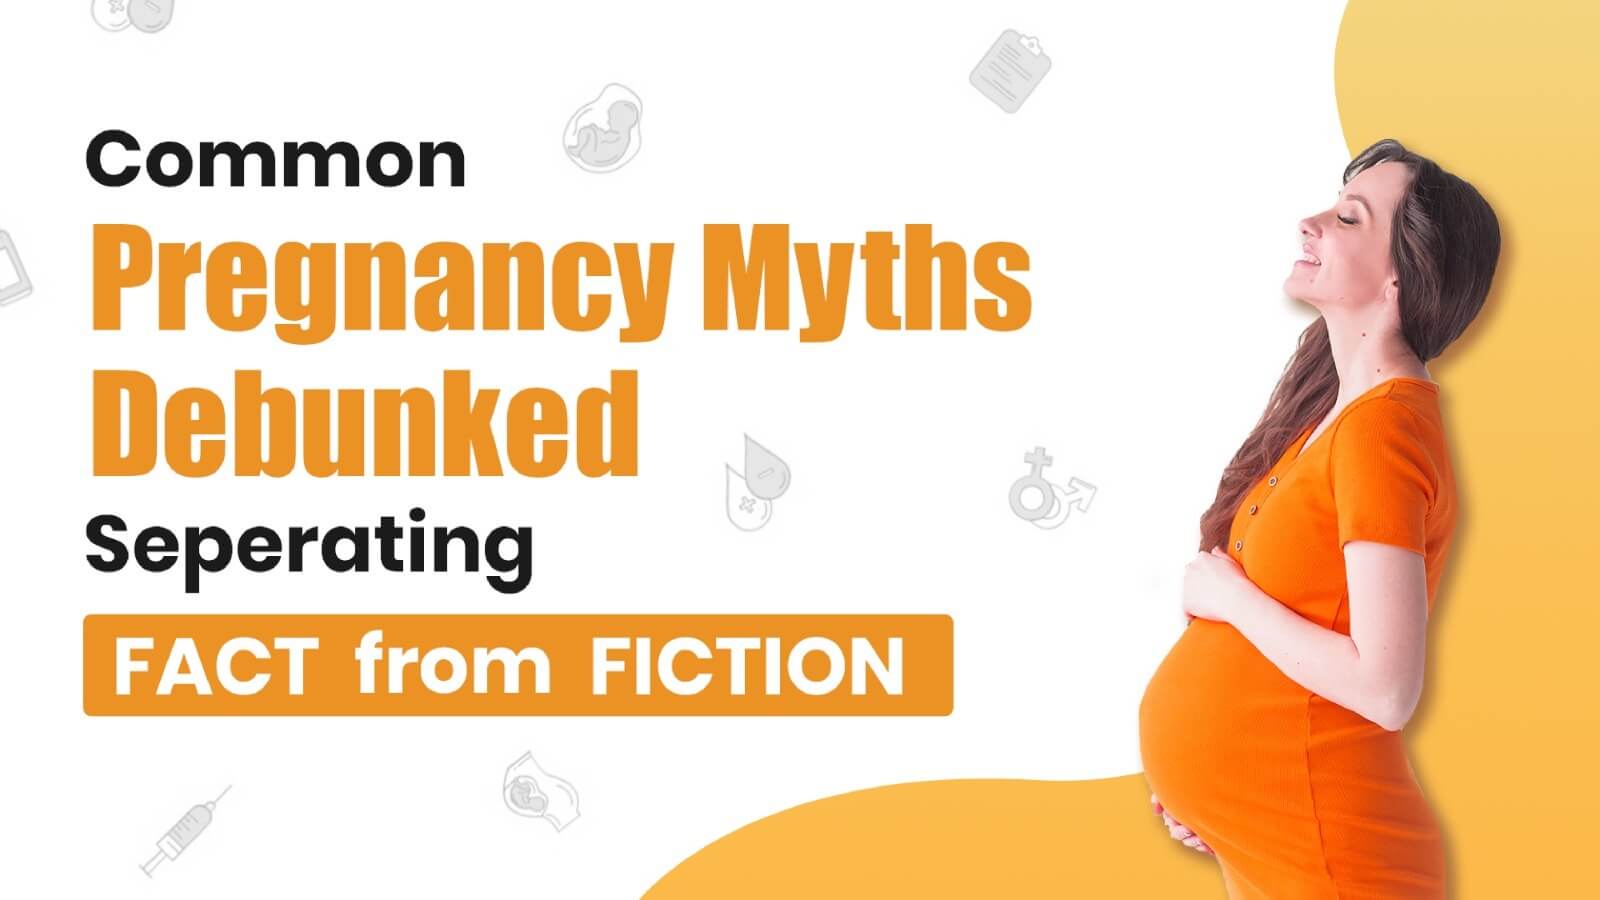 common-pregnancy-myths-debunked-separating-fact-from-fiction